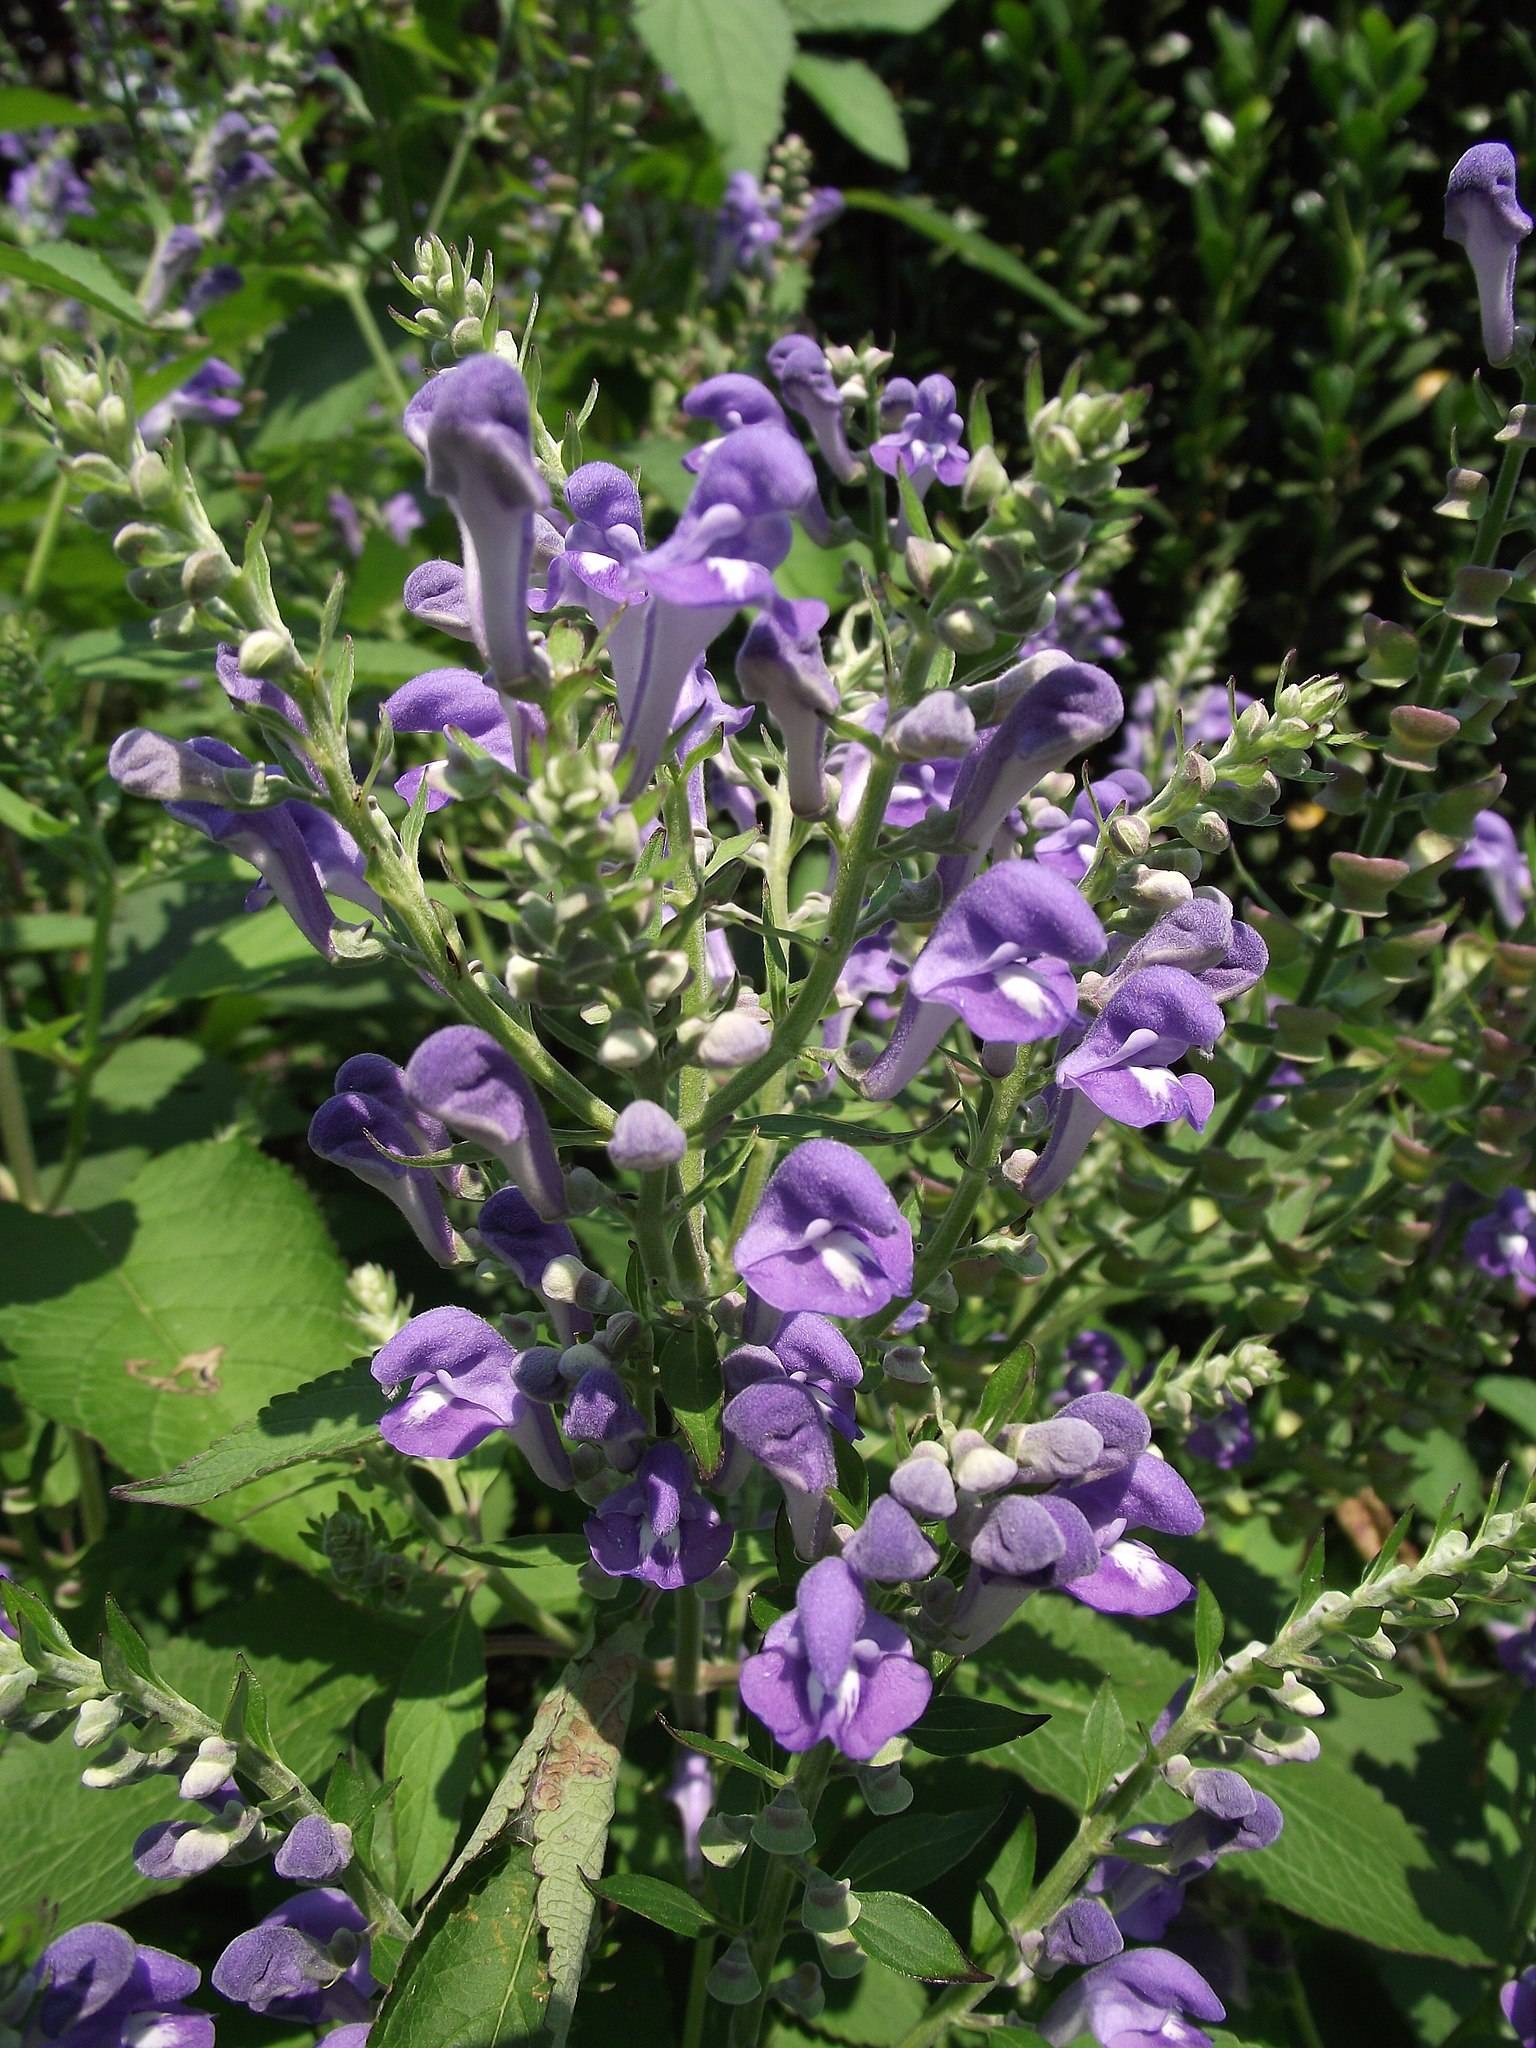 purple-white flowers with green-cream buds, green leaves and stems